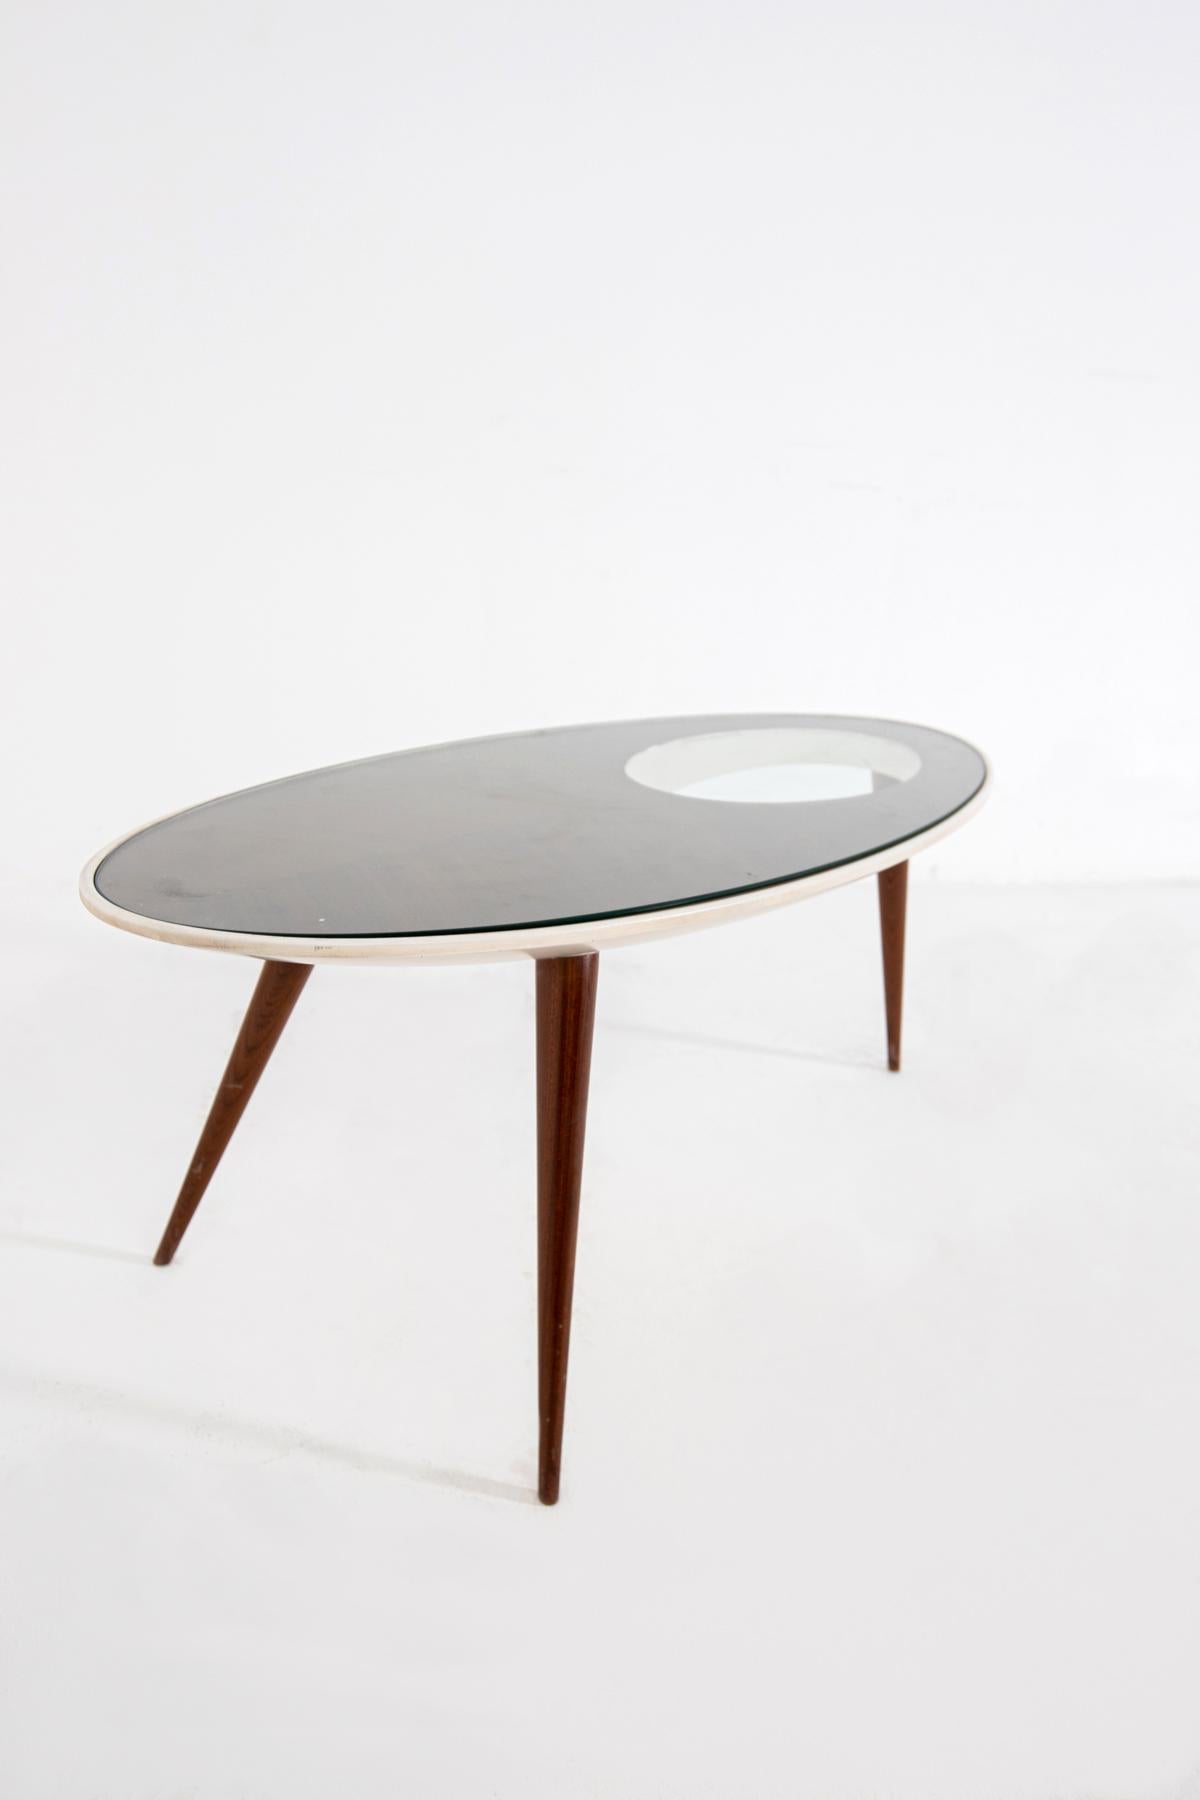 Vintage Italian Coffee Table Inspired by Gio Ponti 1